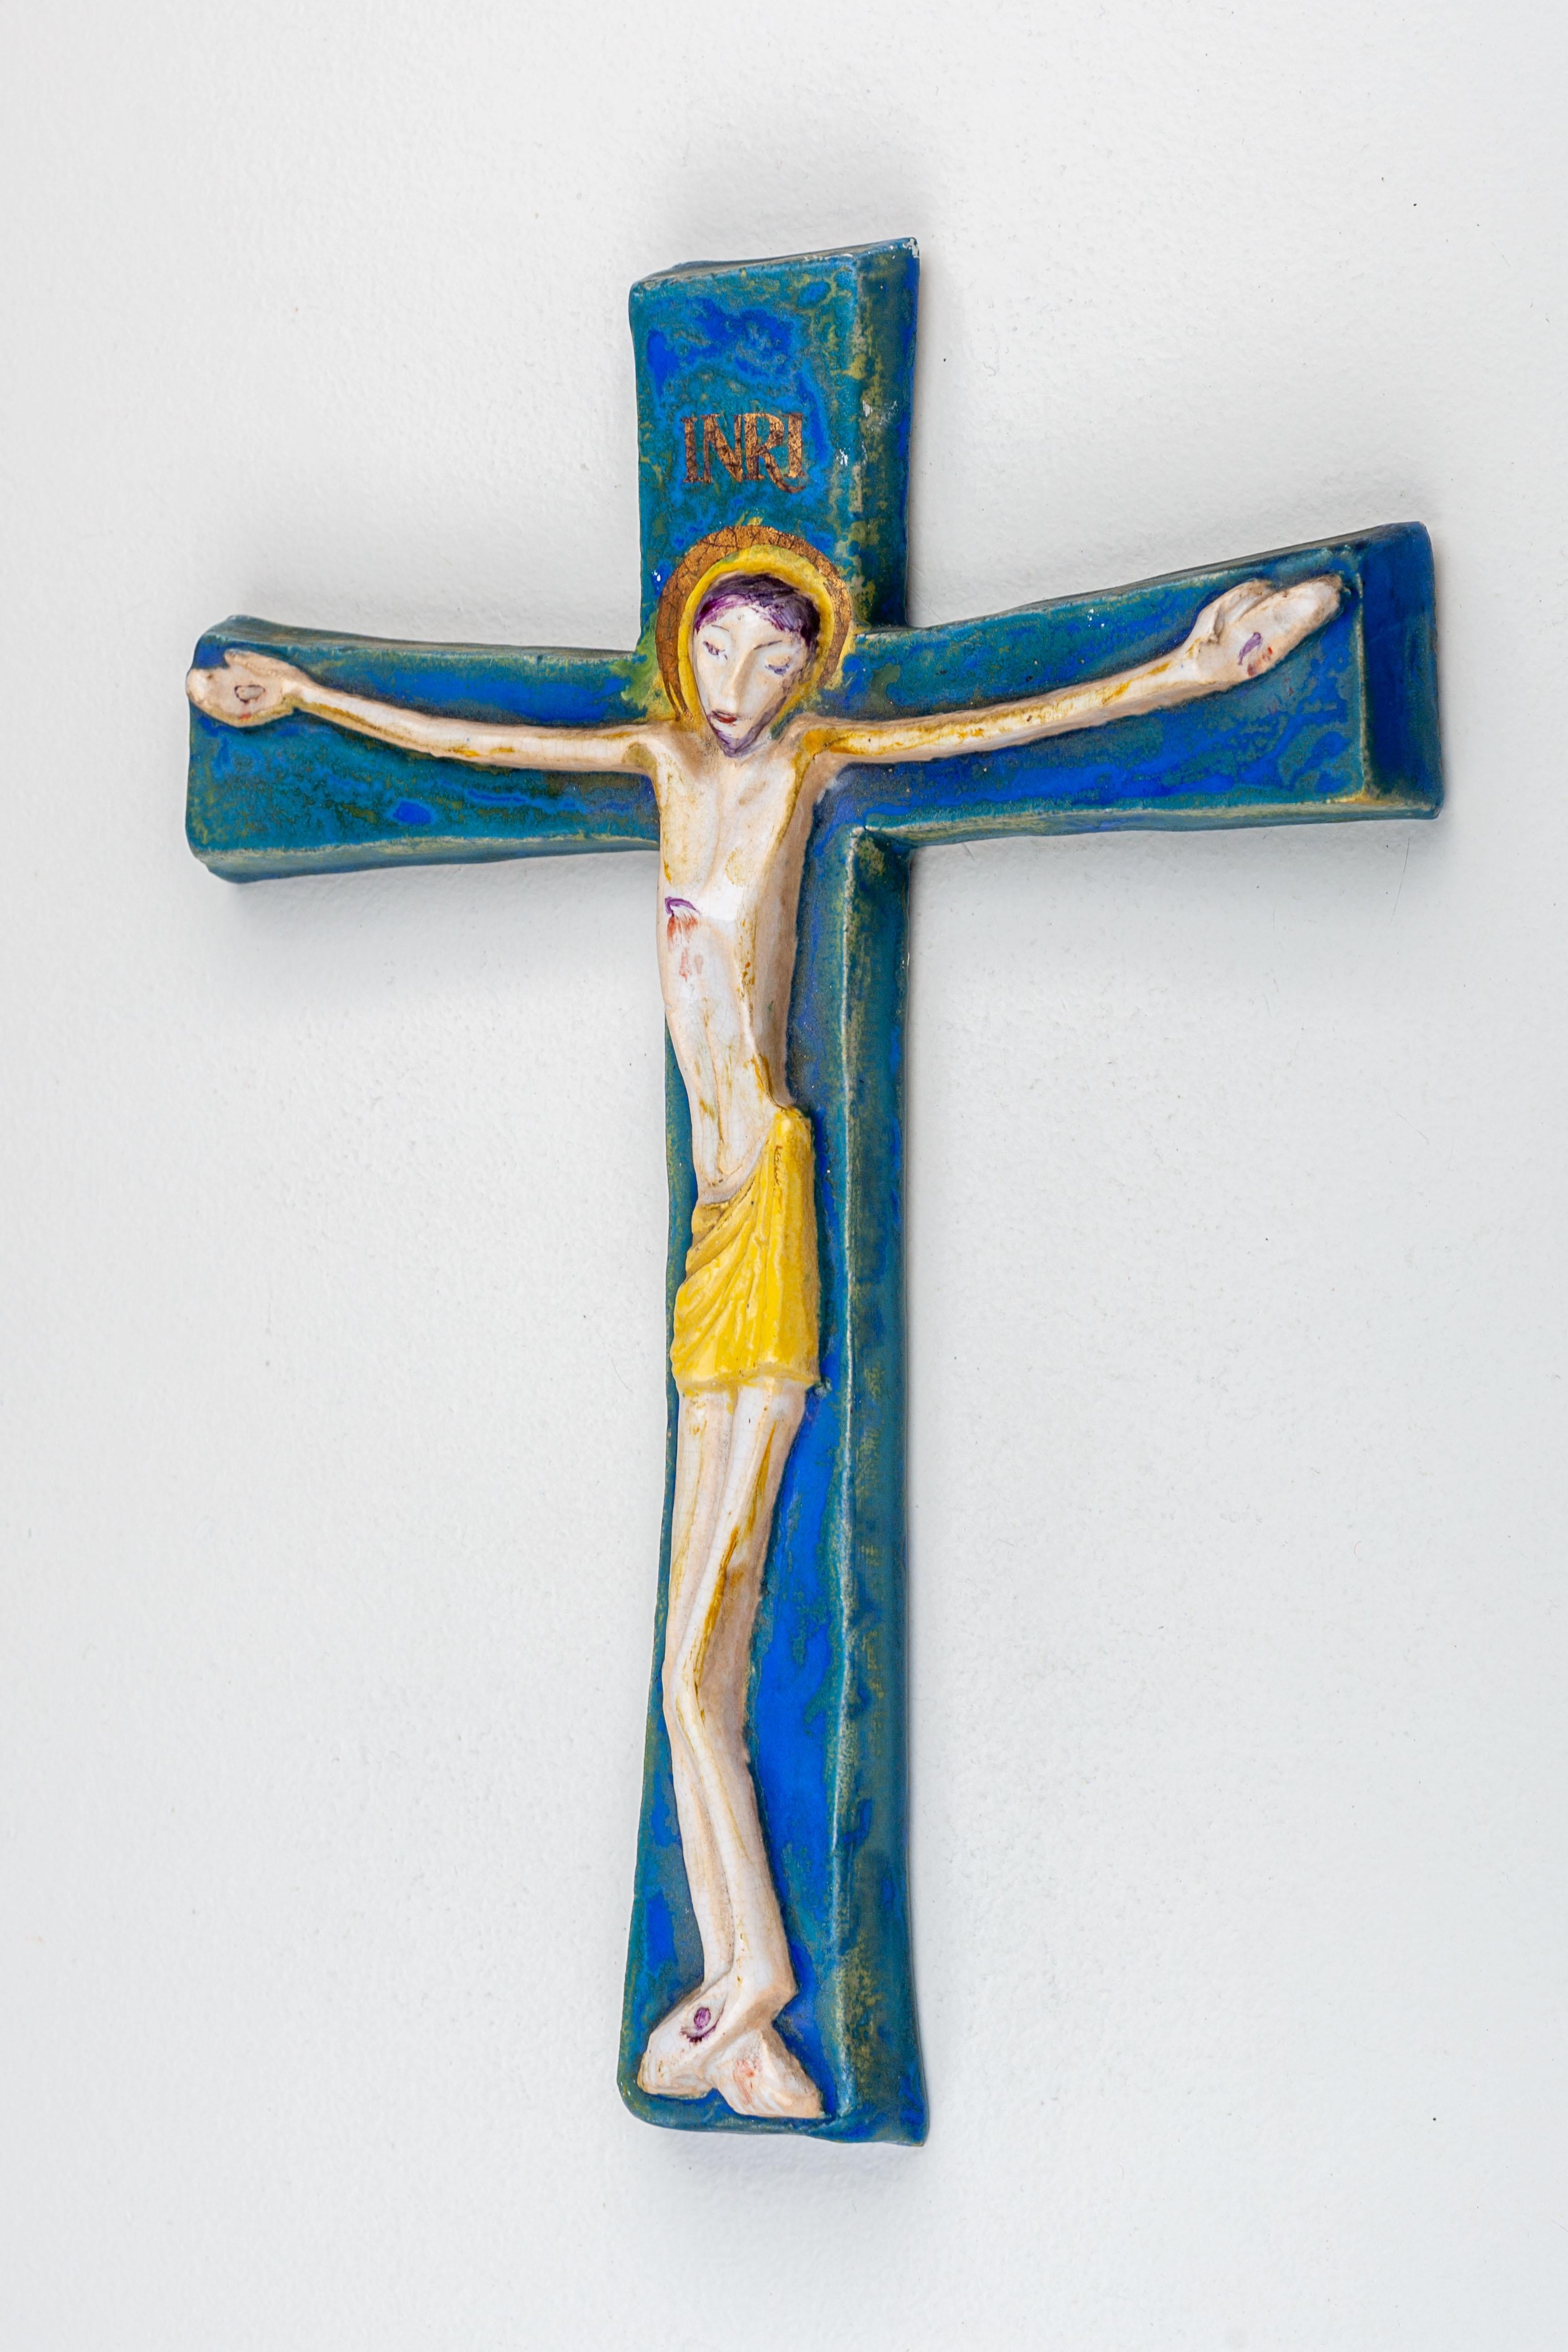 Modernist Cobalt Blue and Gold Wall Cross - European Studio Pottery Masterpiece For Sale 5